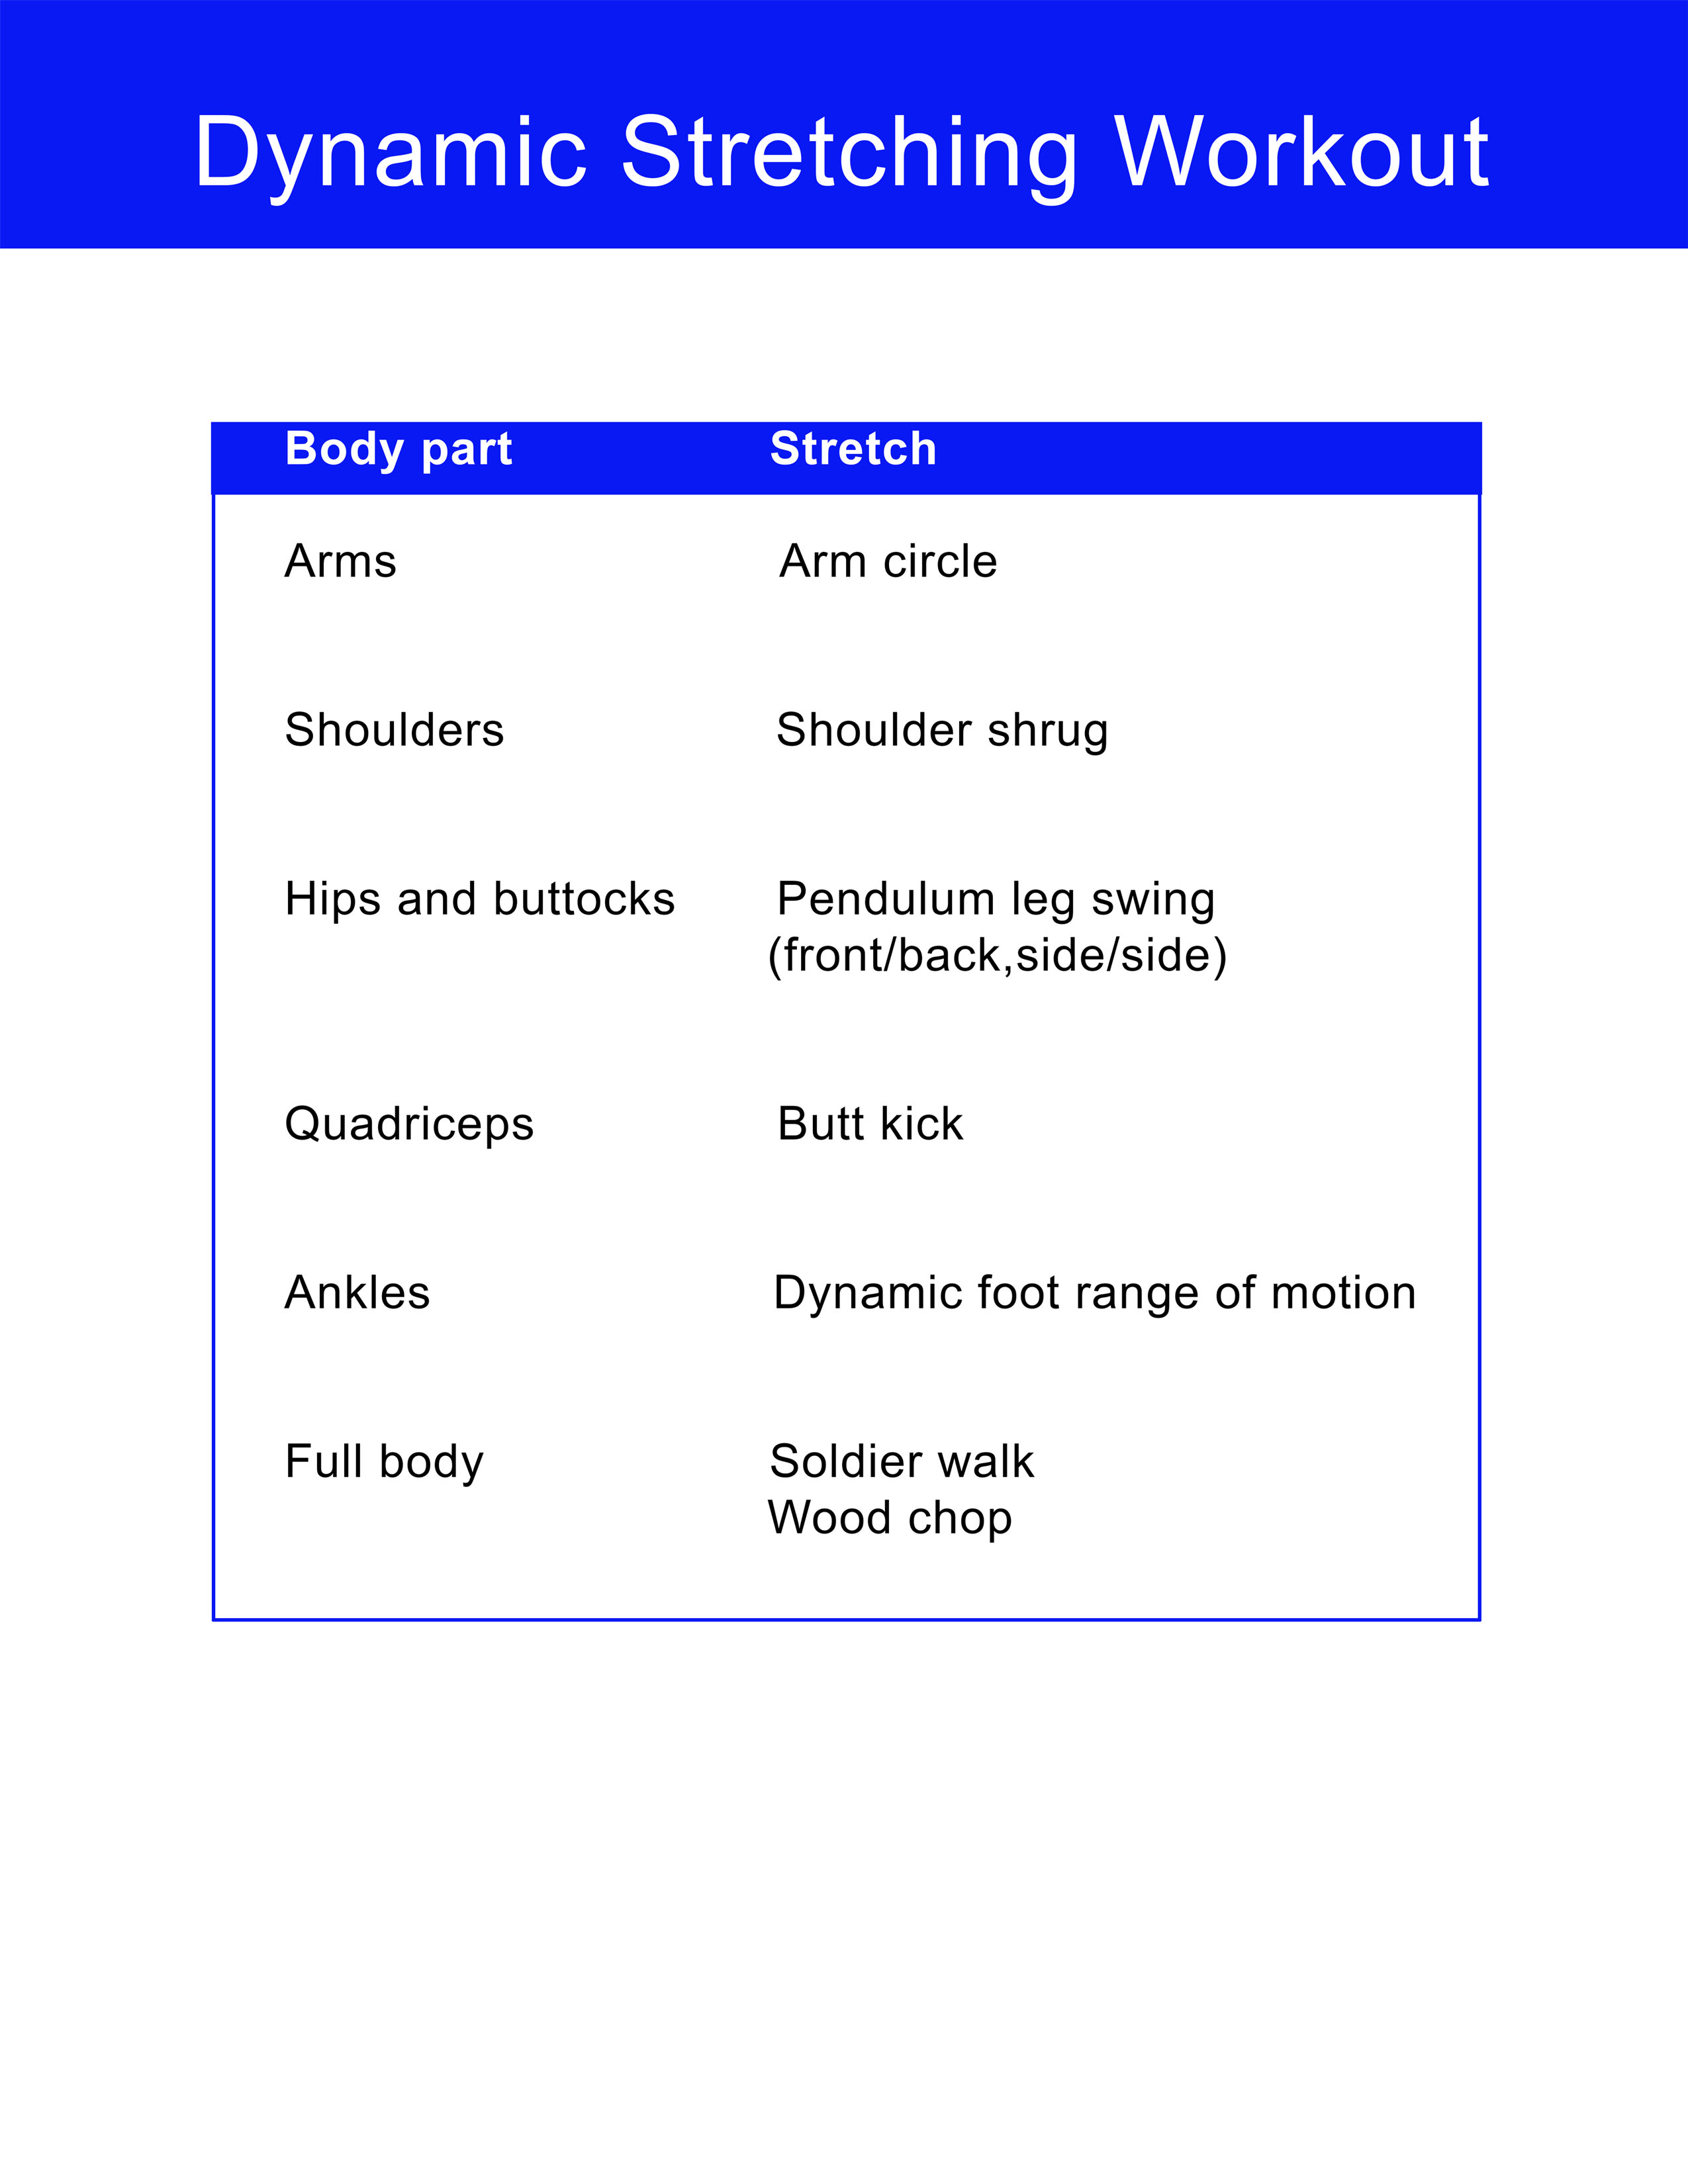 Dynamic stretches exercise chart you can download and print.